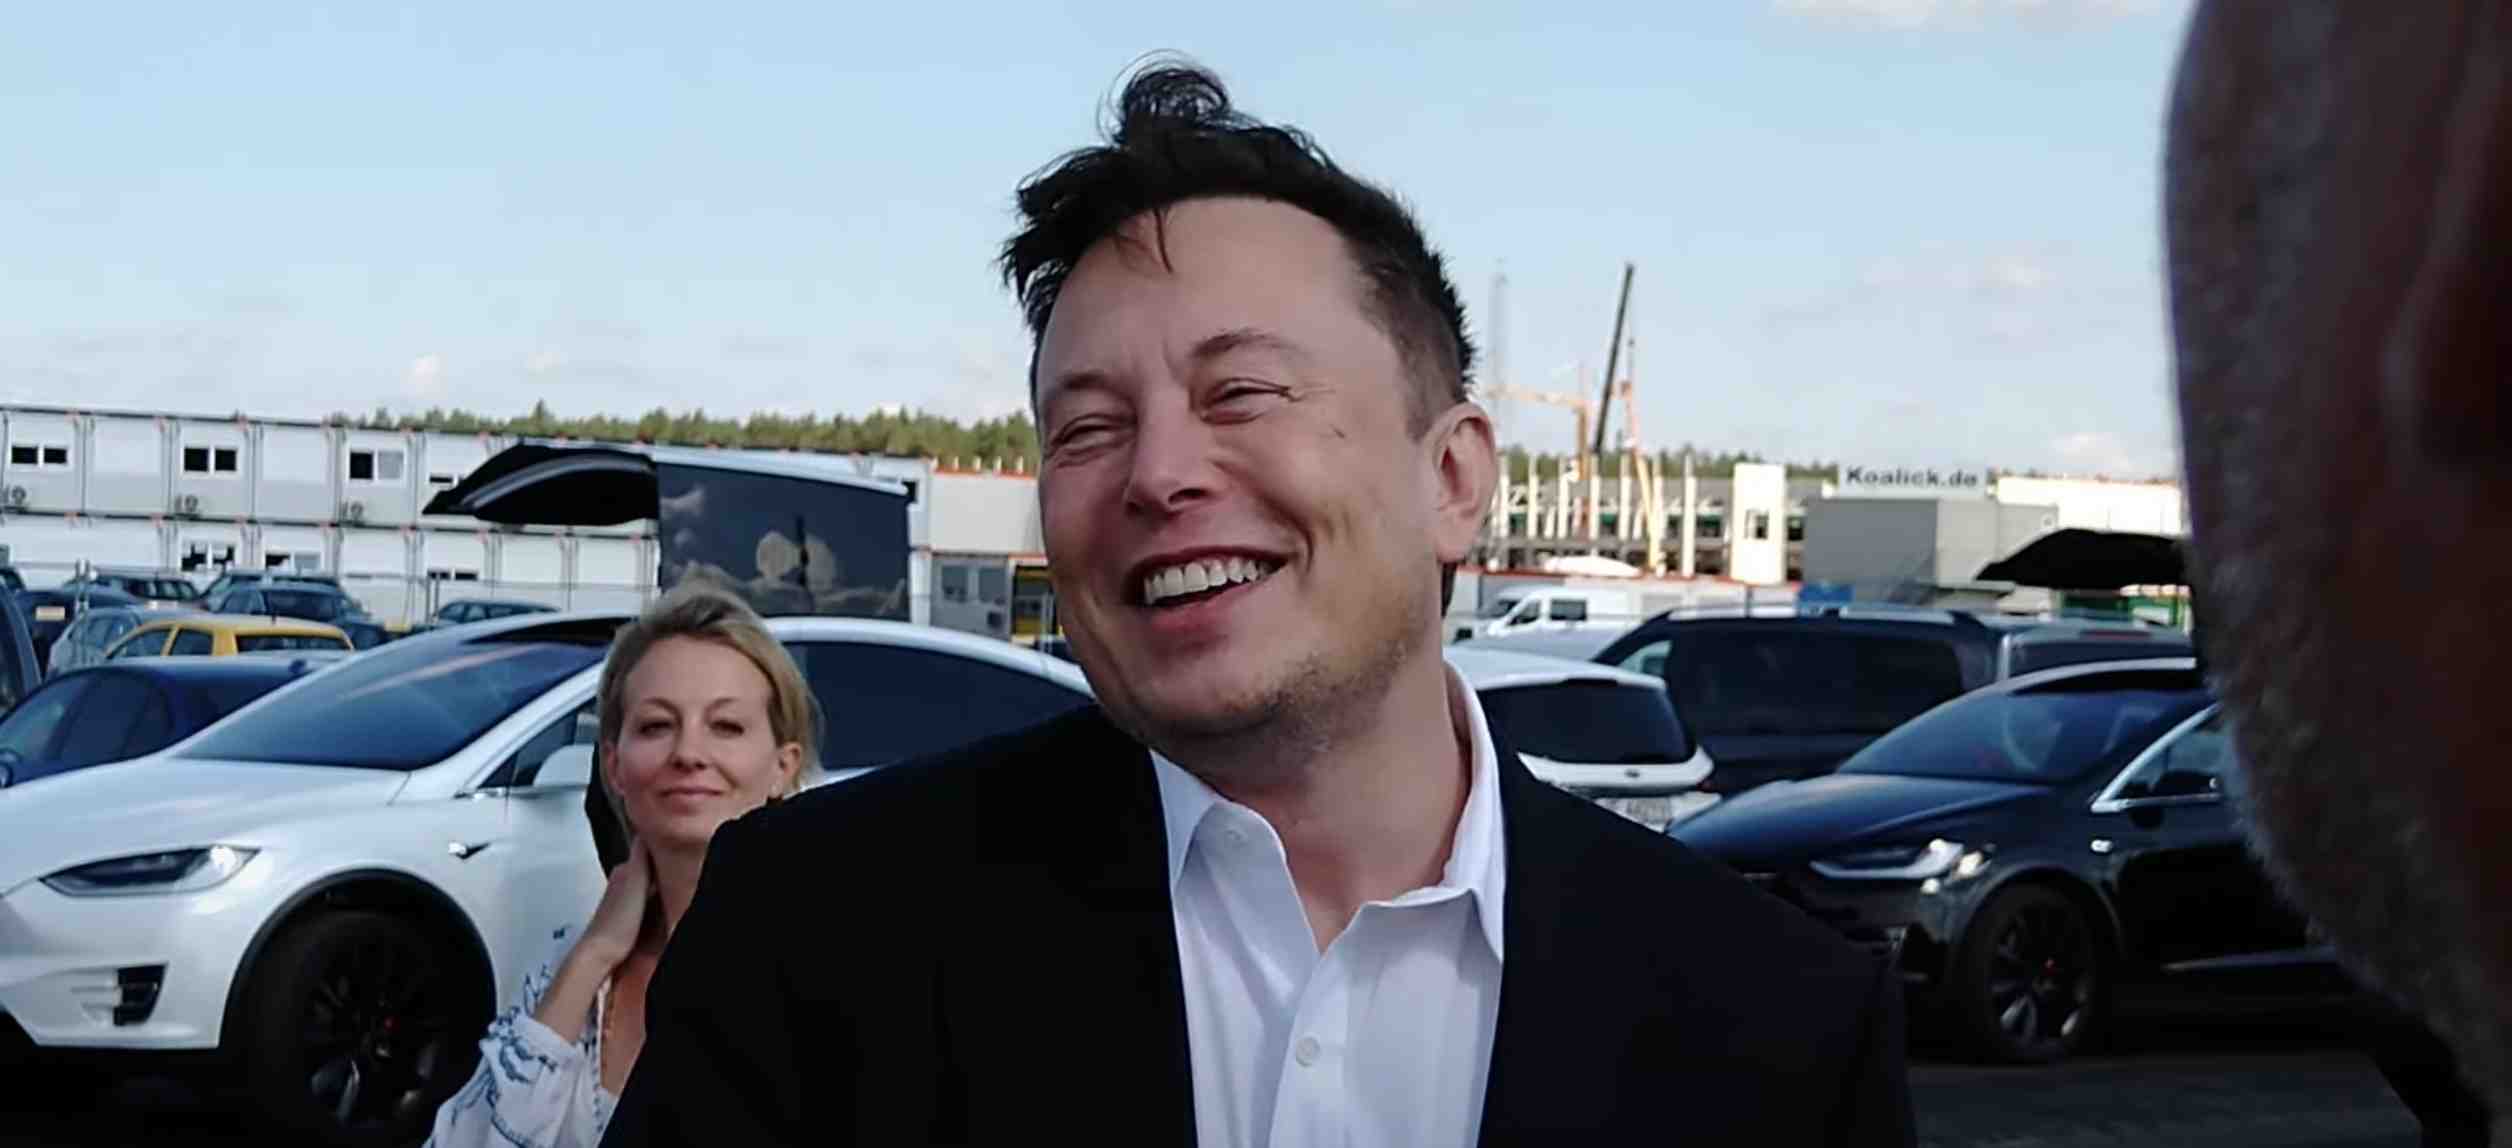 What phone does Elon use?